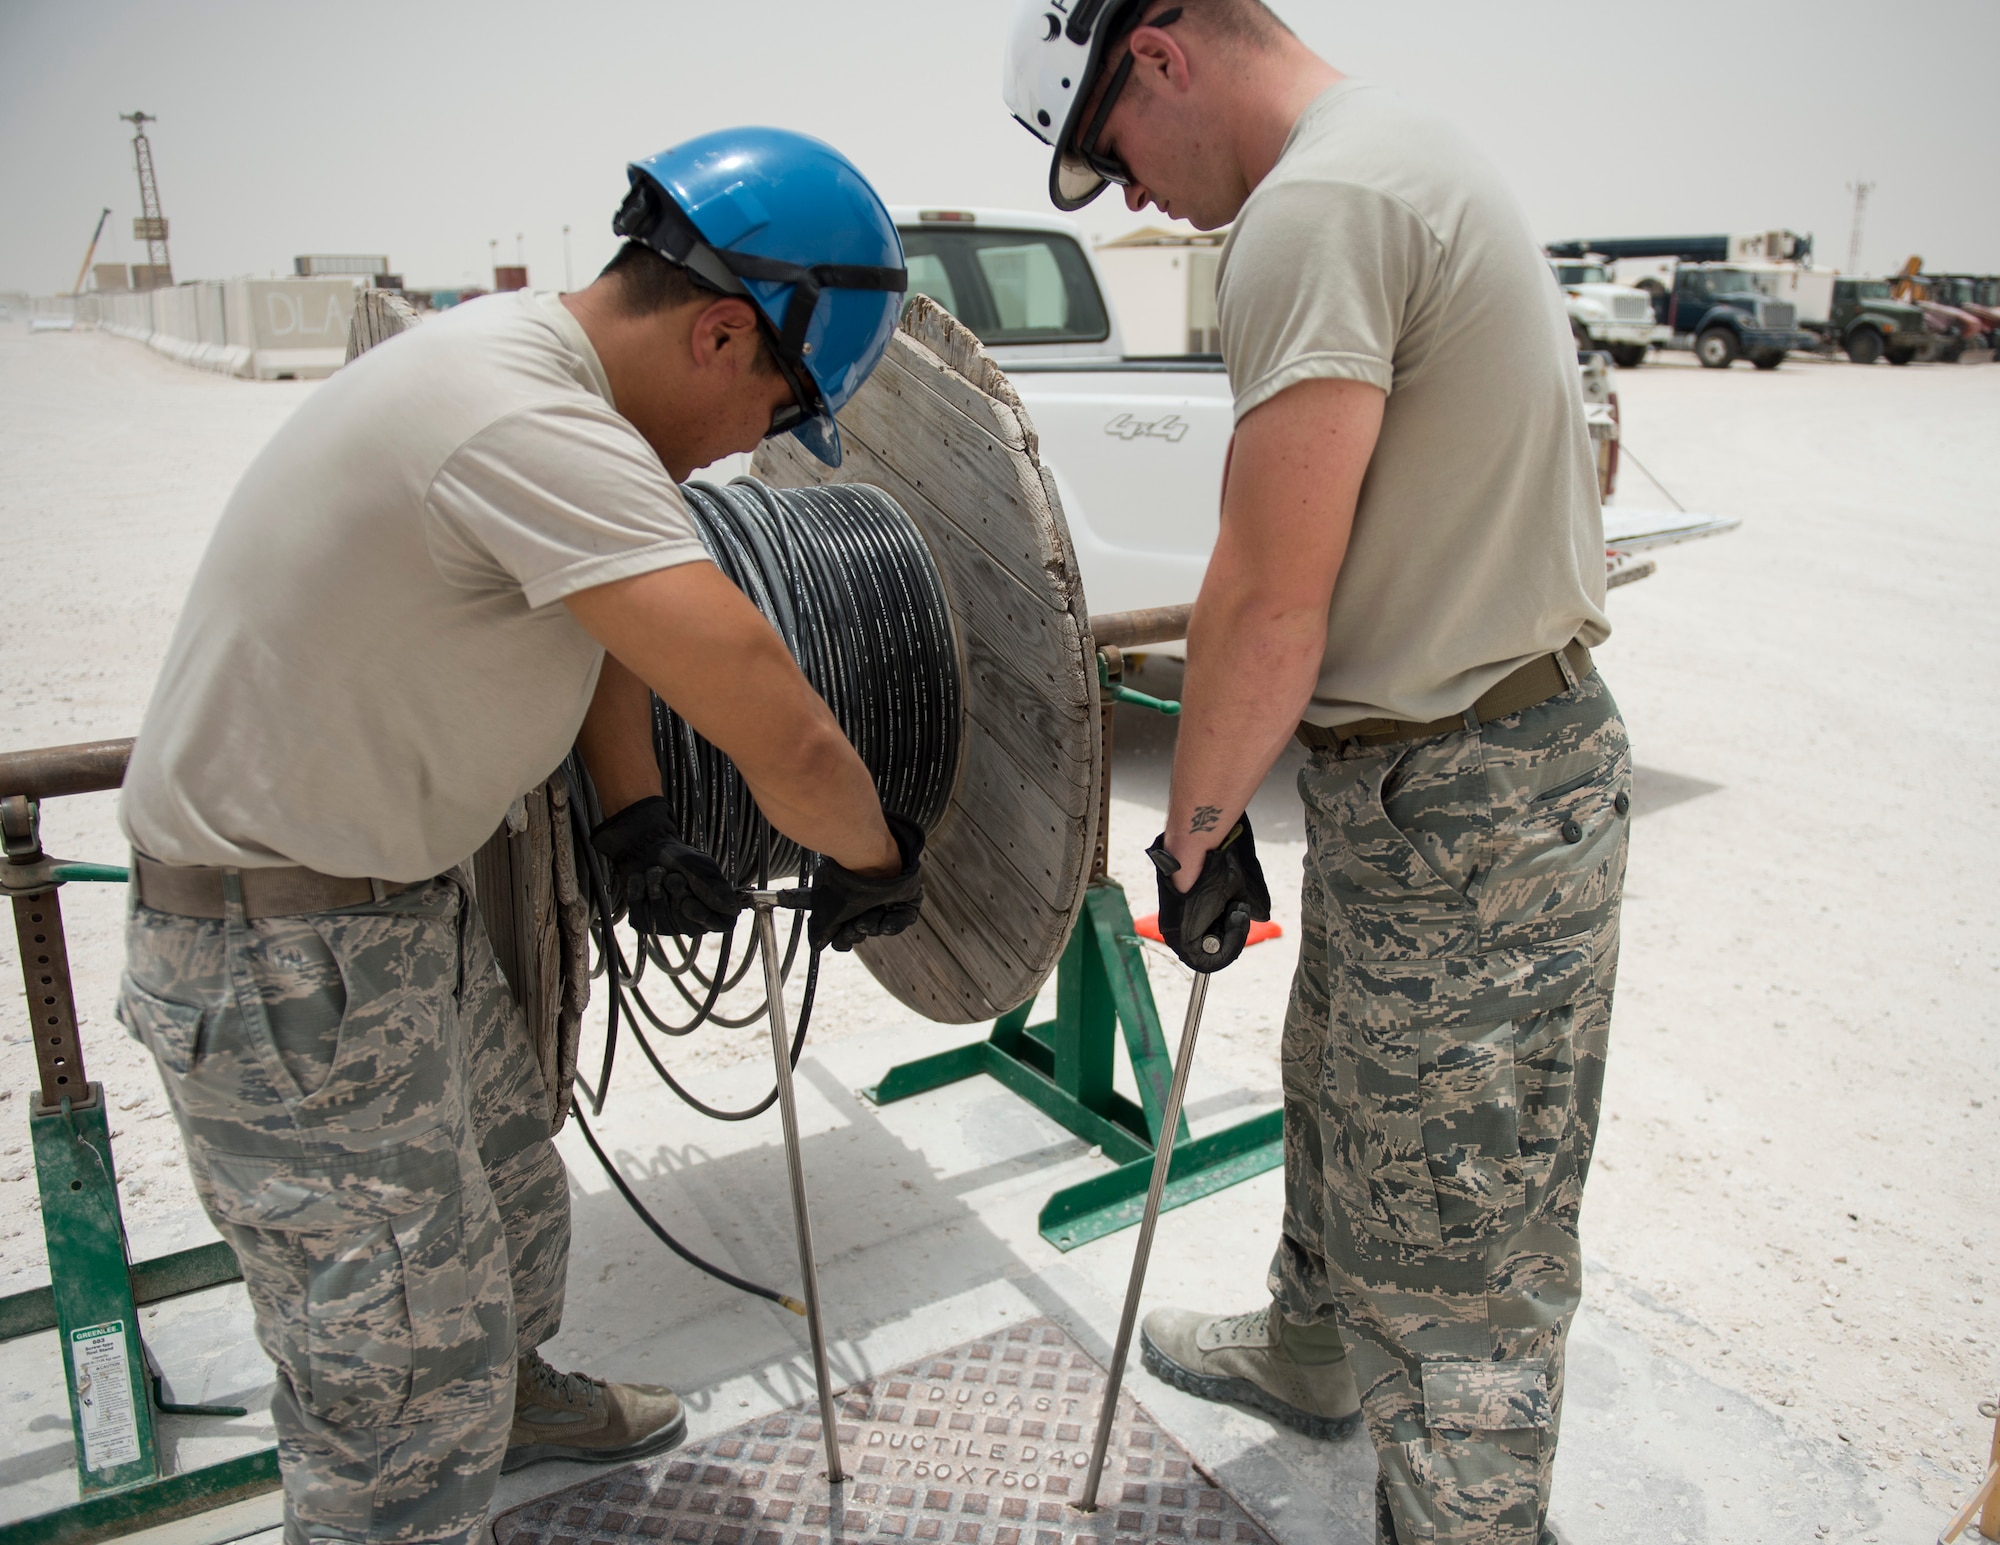 U.S. Air Force Senior Airmen Robert Yurko, right, and Ebby Bryce, cable and antenna system specialists with the 379th Expeditionary Communication Squadron, prepares to remove a communication manhole cover at Al Udeid Air Base, Qatar, July 14, 2017.  Yurko and Bryce are part of a team of airmen that are responsible for installing, sustaining, and repairing miles of copper and fiber optics cables at Al Udeid Air Base. (U.S. Air Force photo by Tech. Sgt. Amy M. Lovgren)